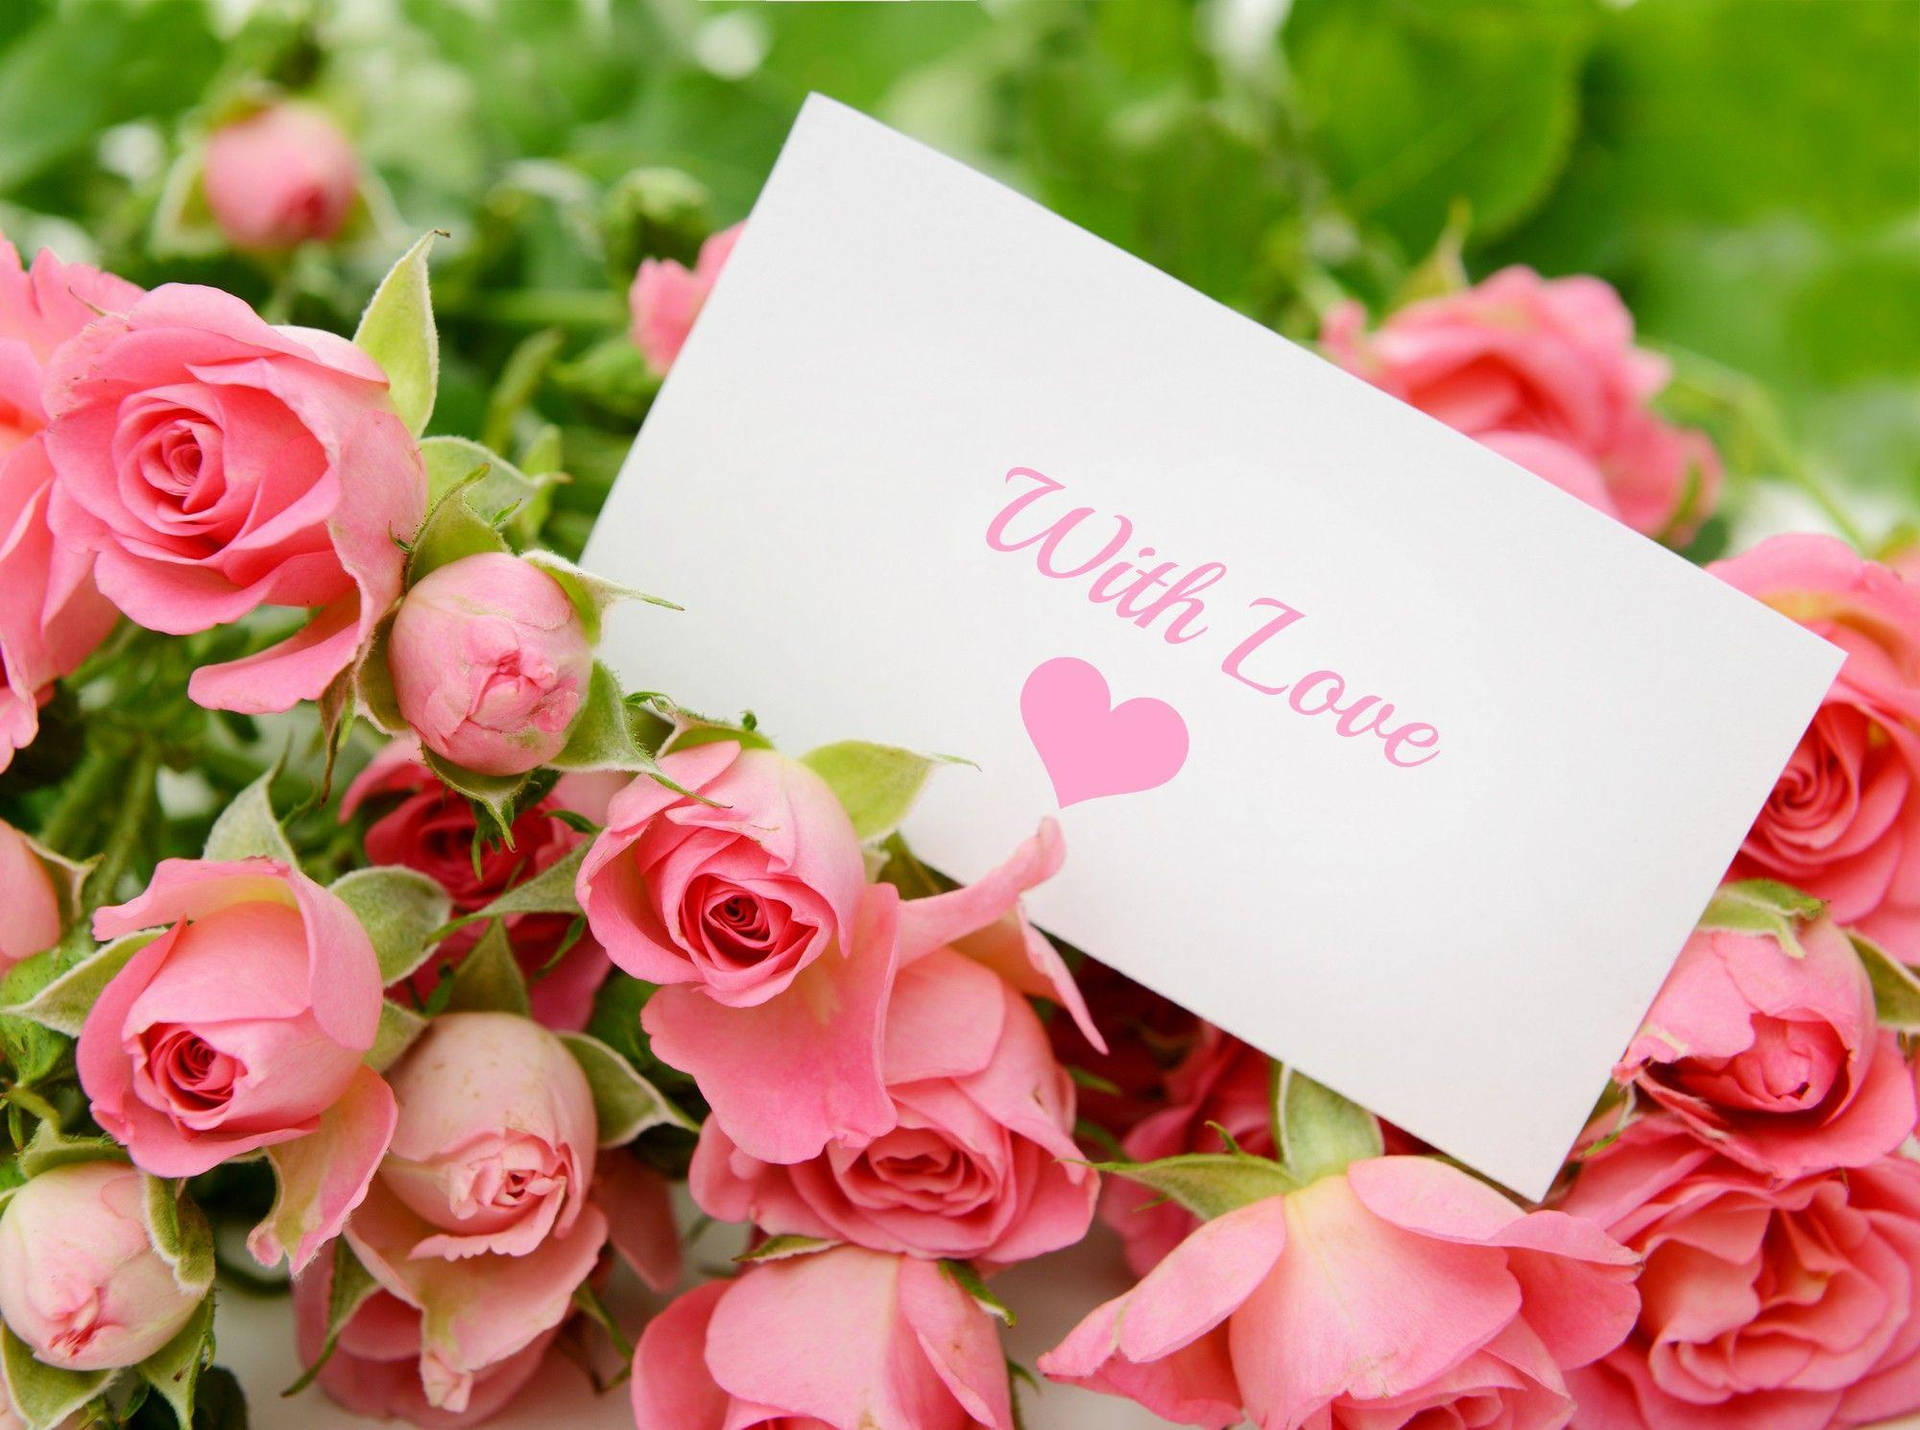 With Love Rose Card Background